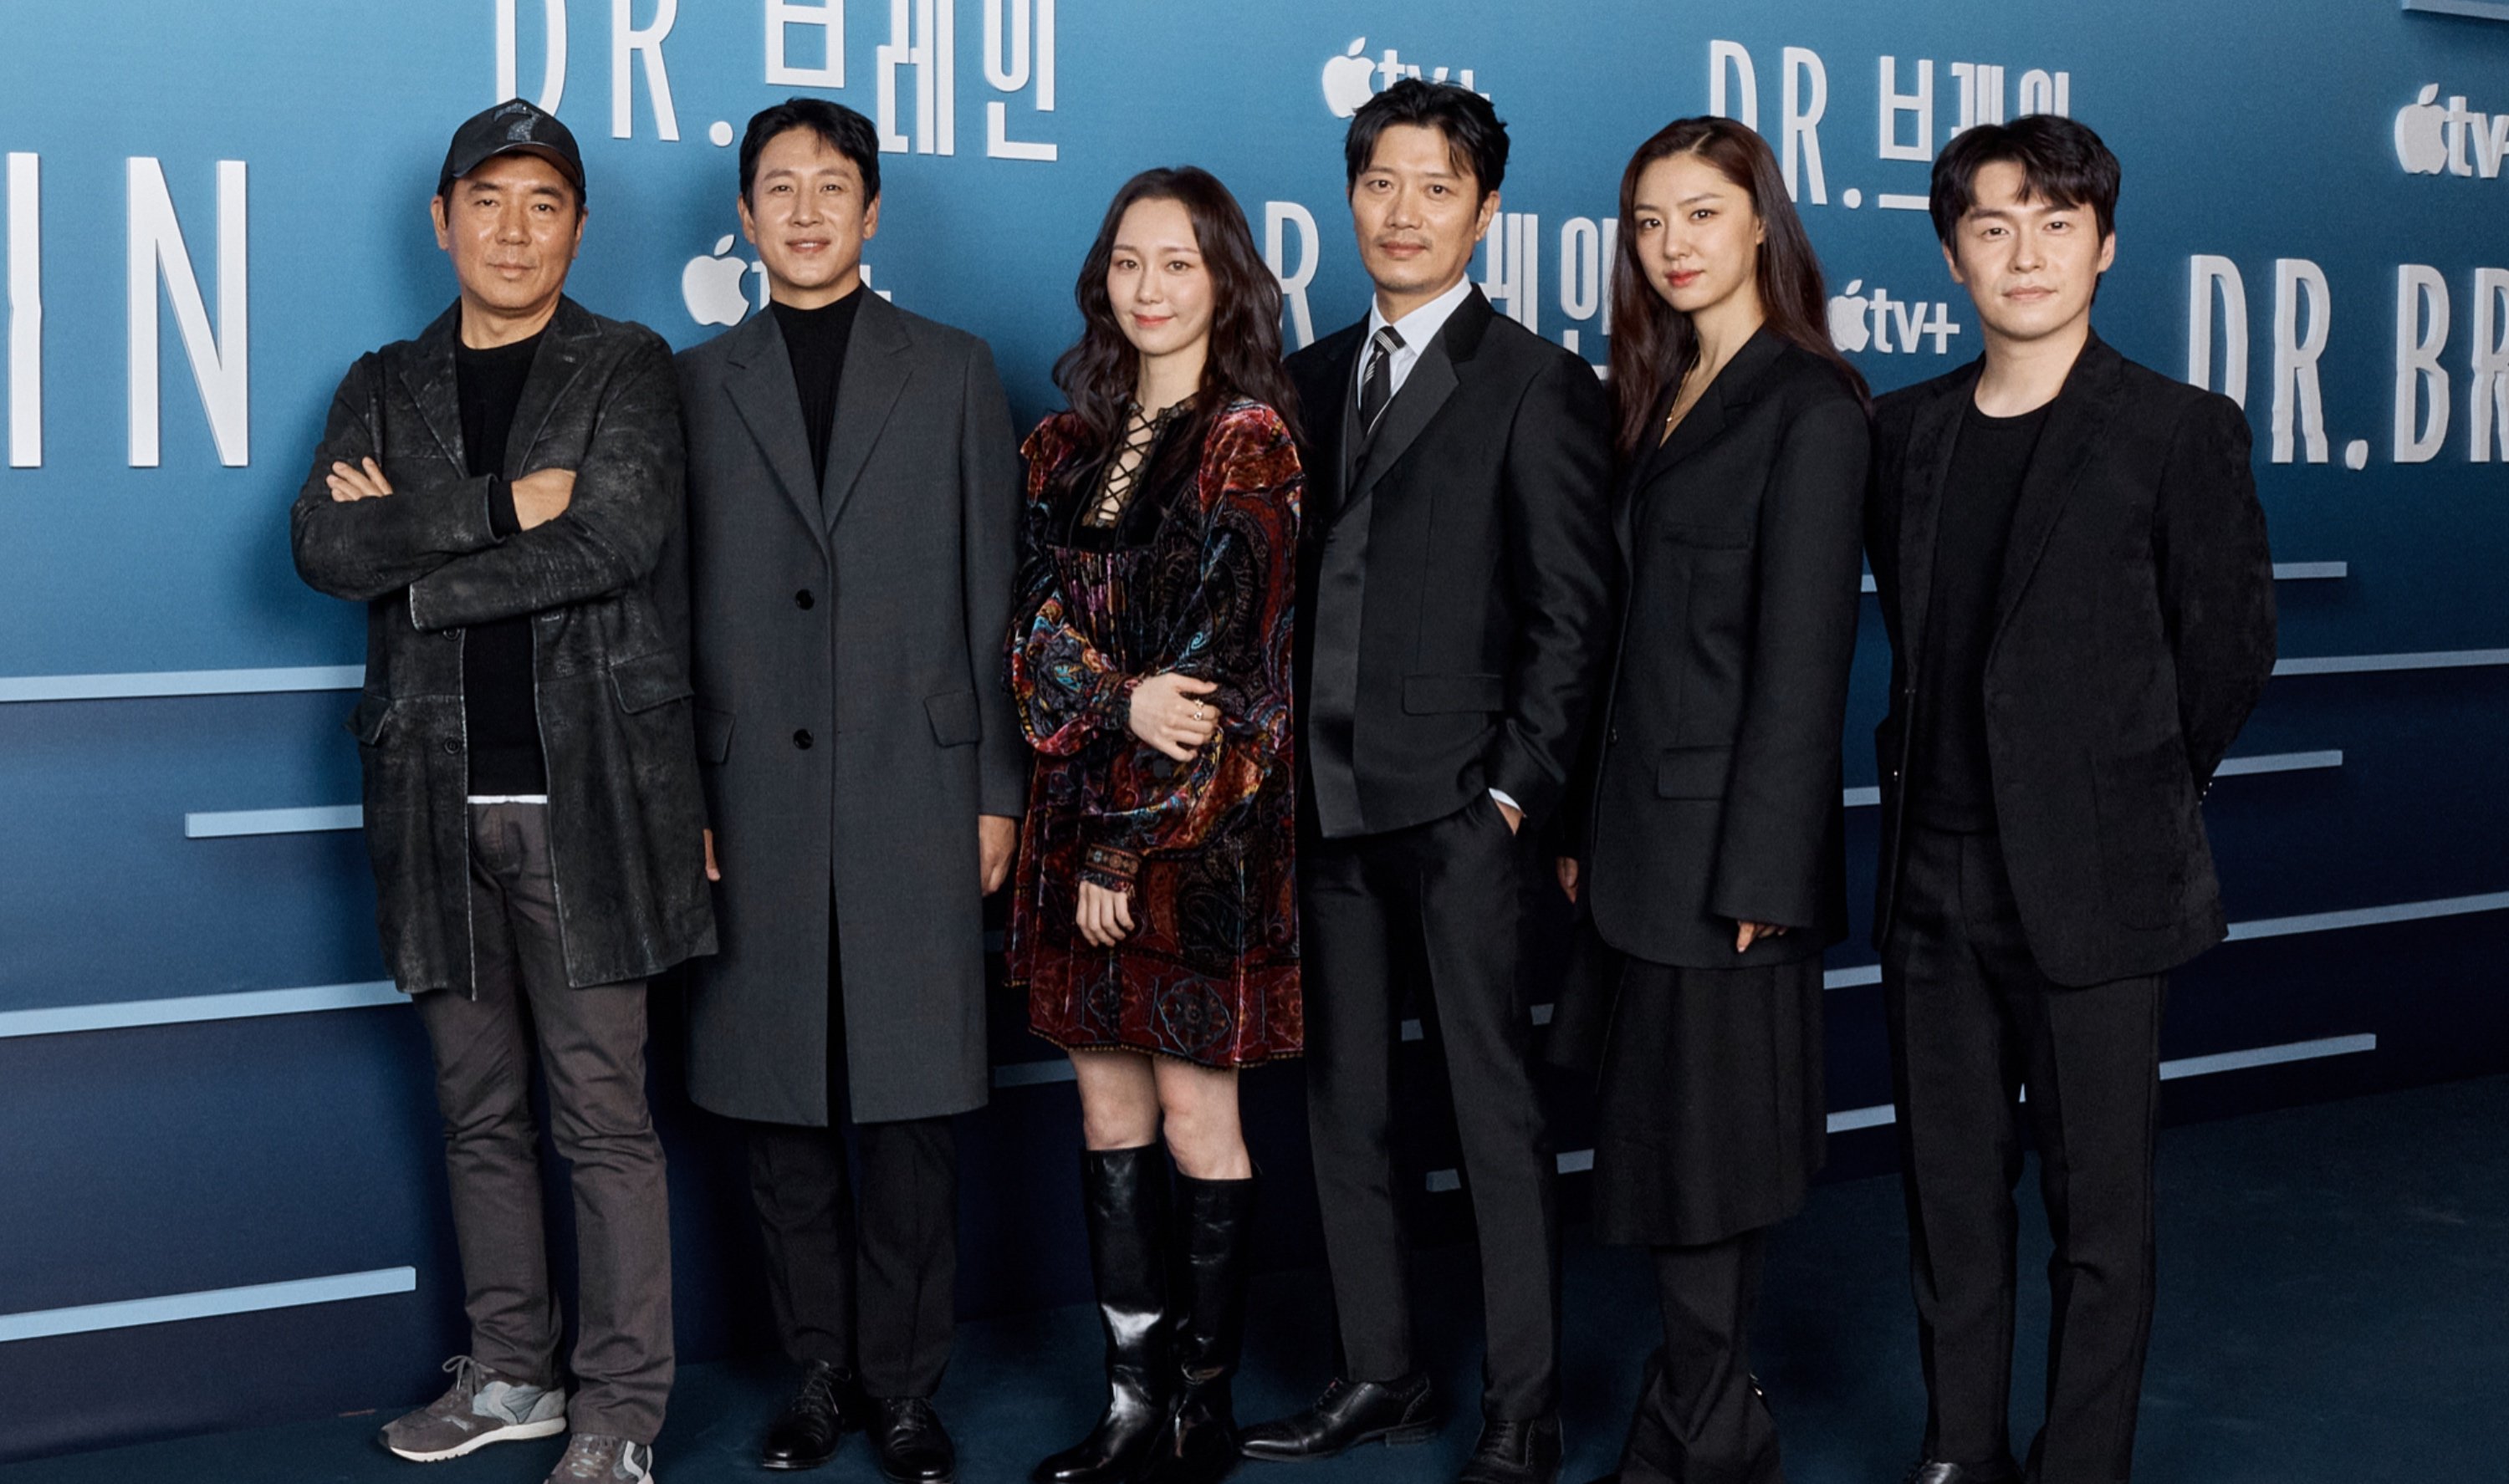 'Dr. Brain' main cast photo call for Apple TV+ standing next to each other